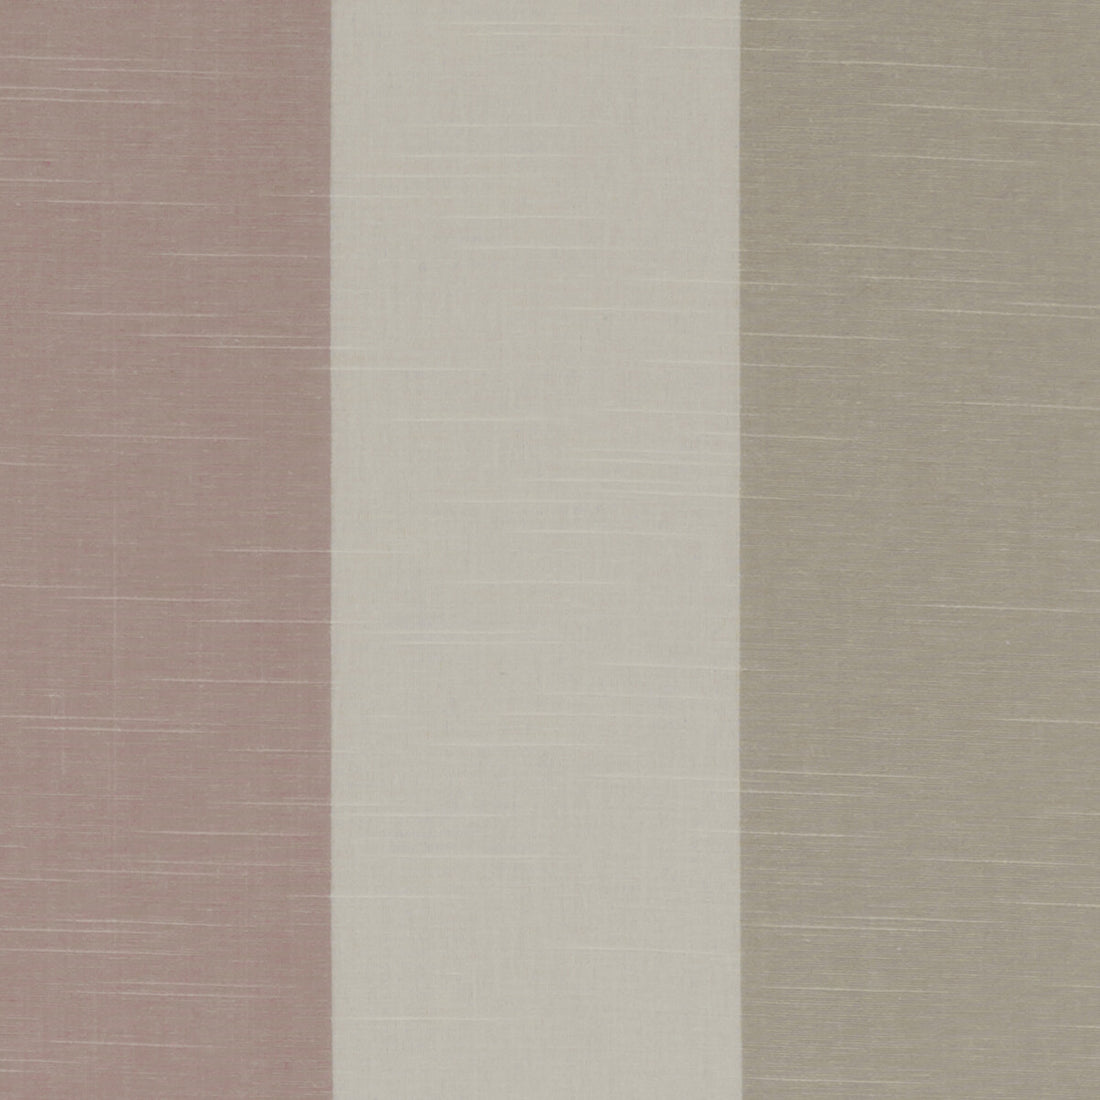 Buckton fabric in blush color - pattern F1308/02.CAC.0 - by Clarke And Clarke in the Bempton By Studio G For C&amp;C collection